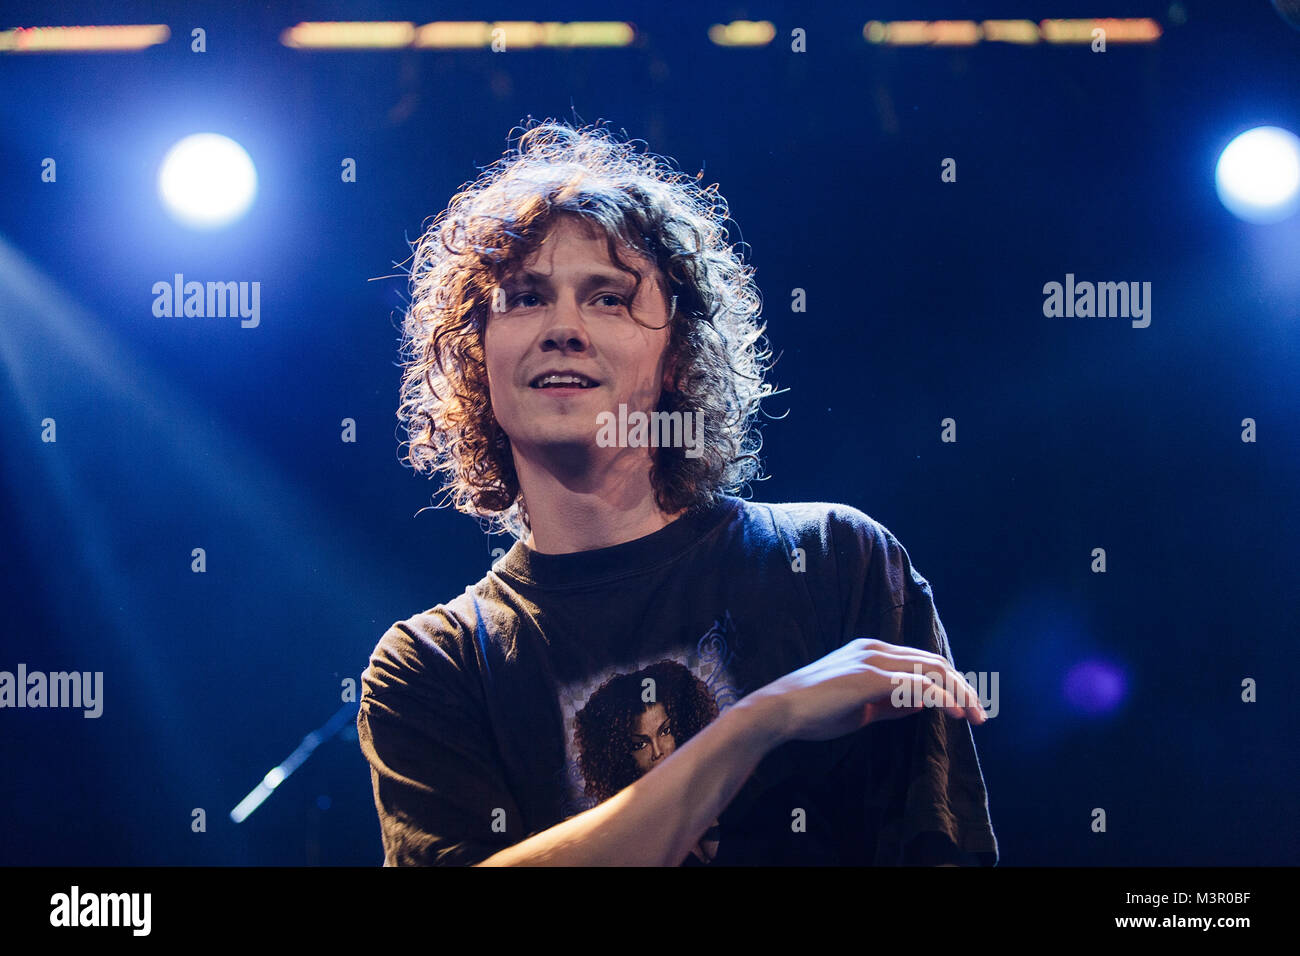 The Danish electro pop band M.I.L.K. performs a concert the Danish music and showcase festival Spot Festival 2016. Here singer Emil Wilk is seen live on stage. Denmark, 29/04 2016. Stock Photo